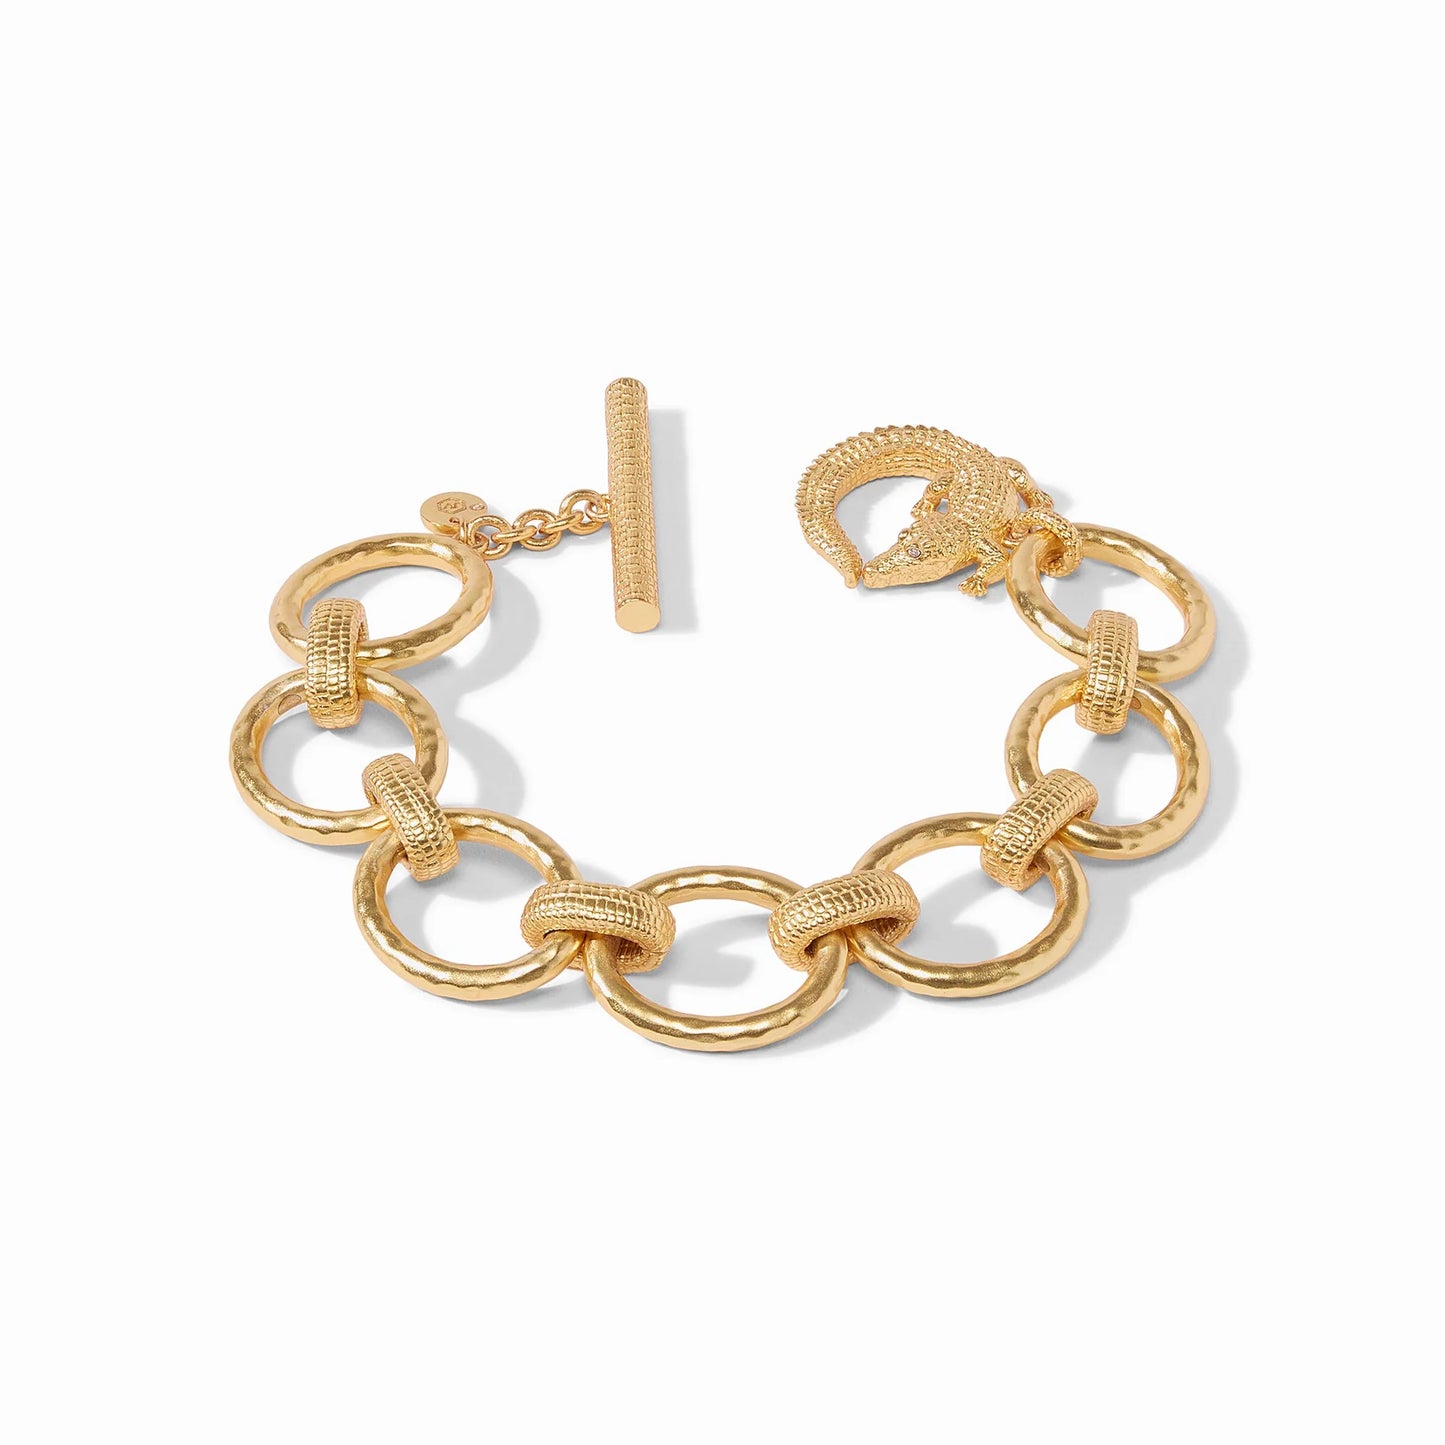 Alligator Link Bracelet by Julie Vos features hammered oval links with textured connecting links, finished with an alligator toggle ring and textured toggle.  24K gold plate, CZ. Shop at The Painted Cottage in Edgewater, MD.